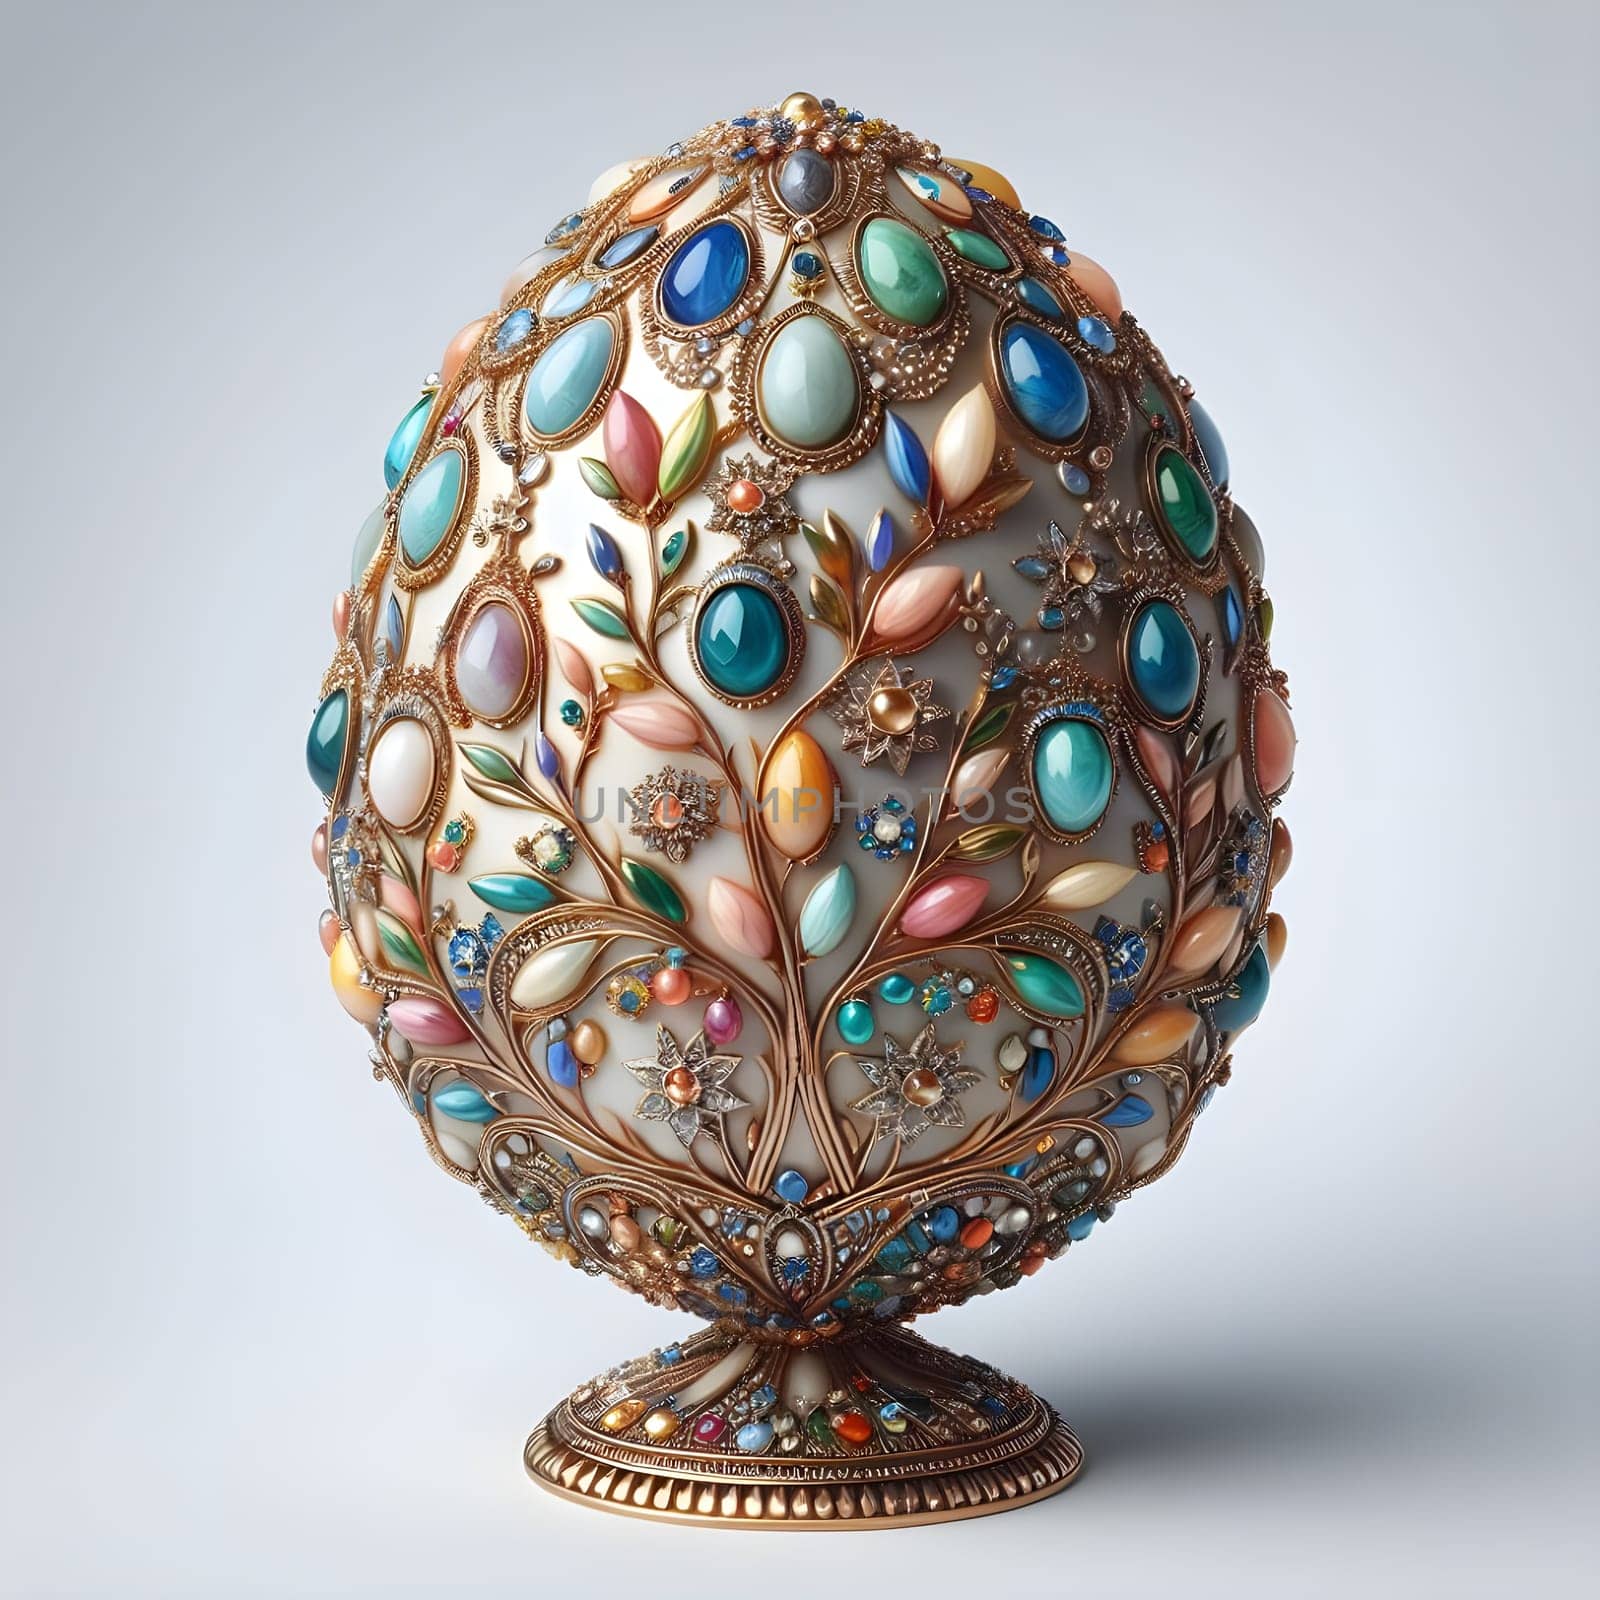 A luxurious easter egg, encrusted with sparkling jewels and intricate filigree, fit for royalty-free Jeweled Egg, Easter Egg, Paschal Egg, Jewelry Art, Home Decor, Art Collectible, OOAK Gifts. High quality photo